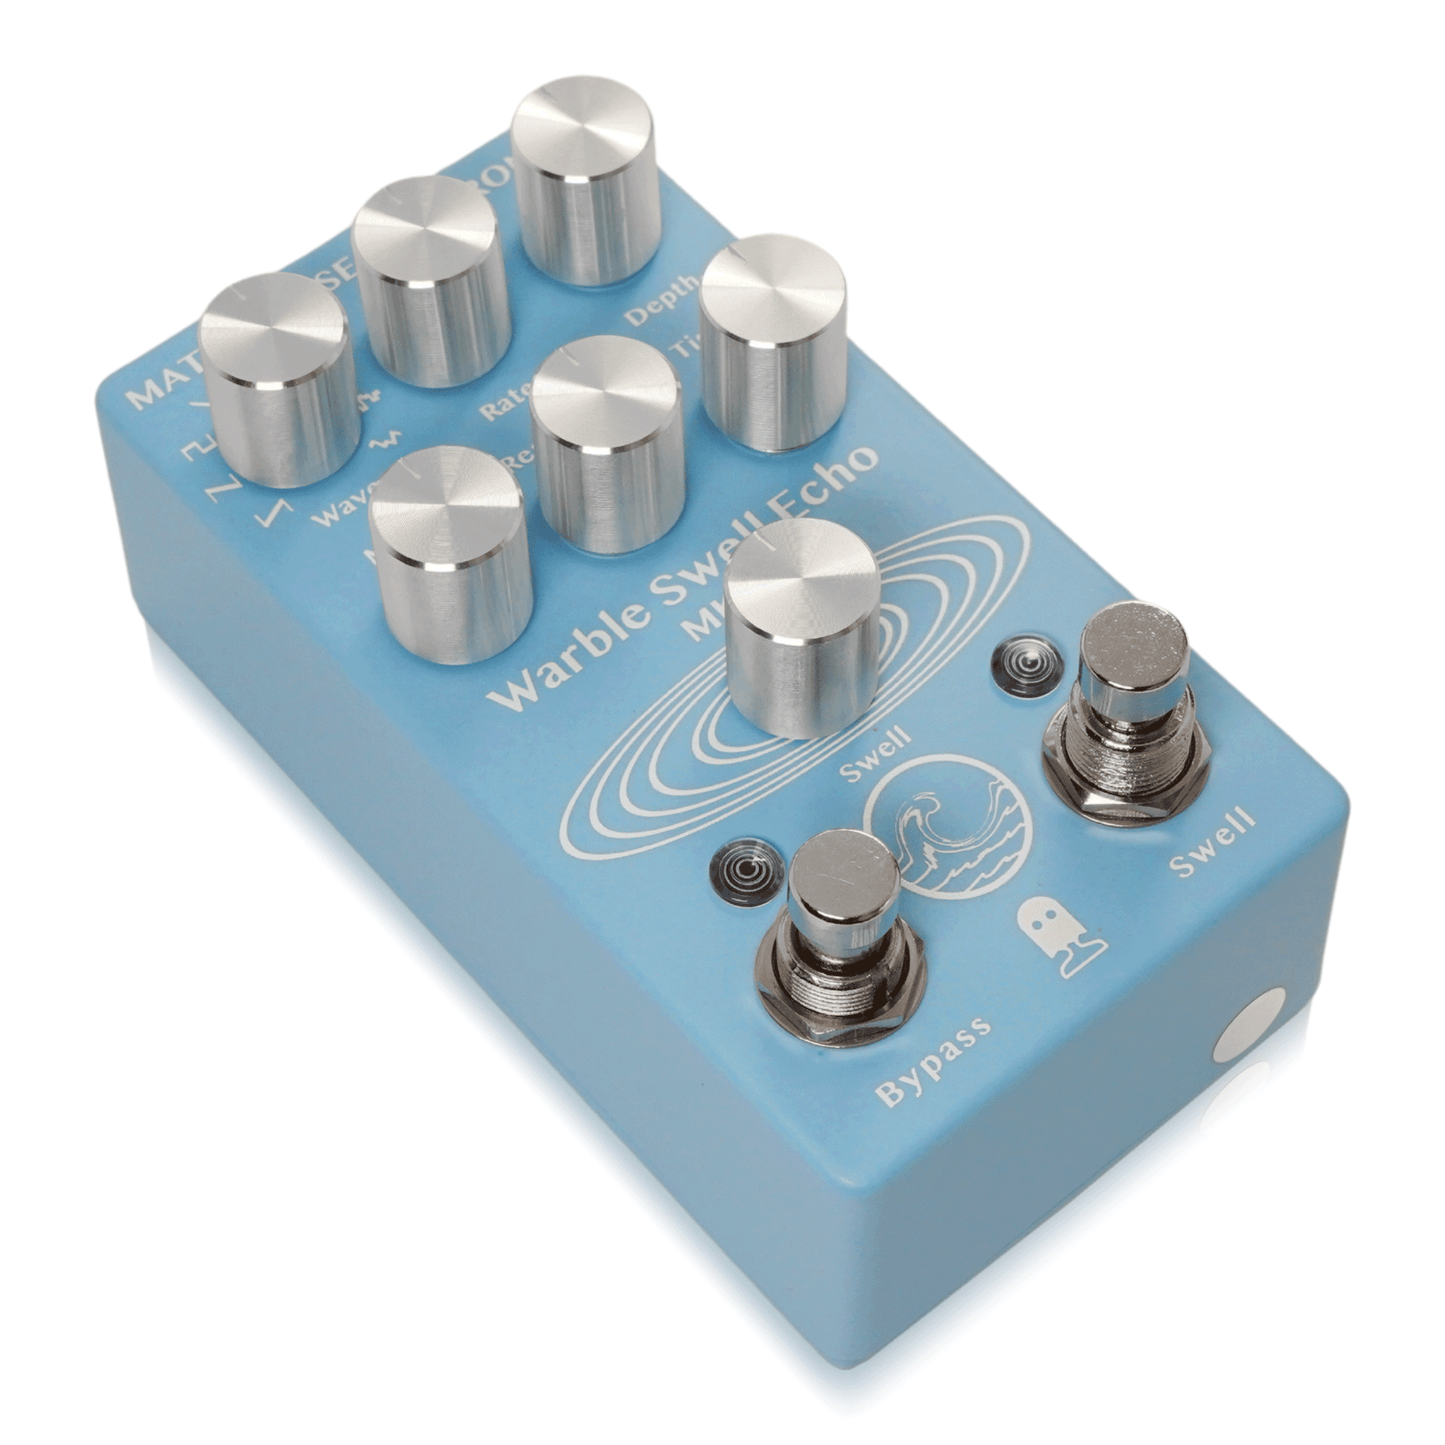 Mattoverse Electronics / Warble Swell Echo MKII